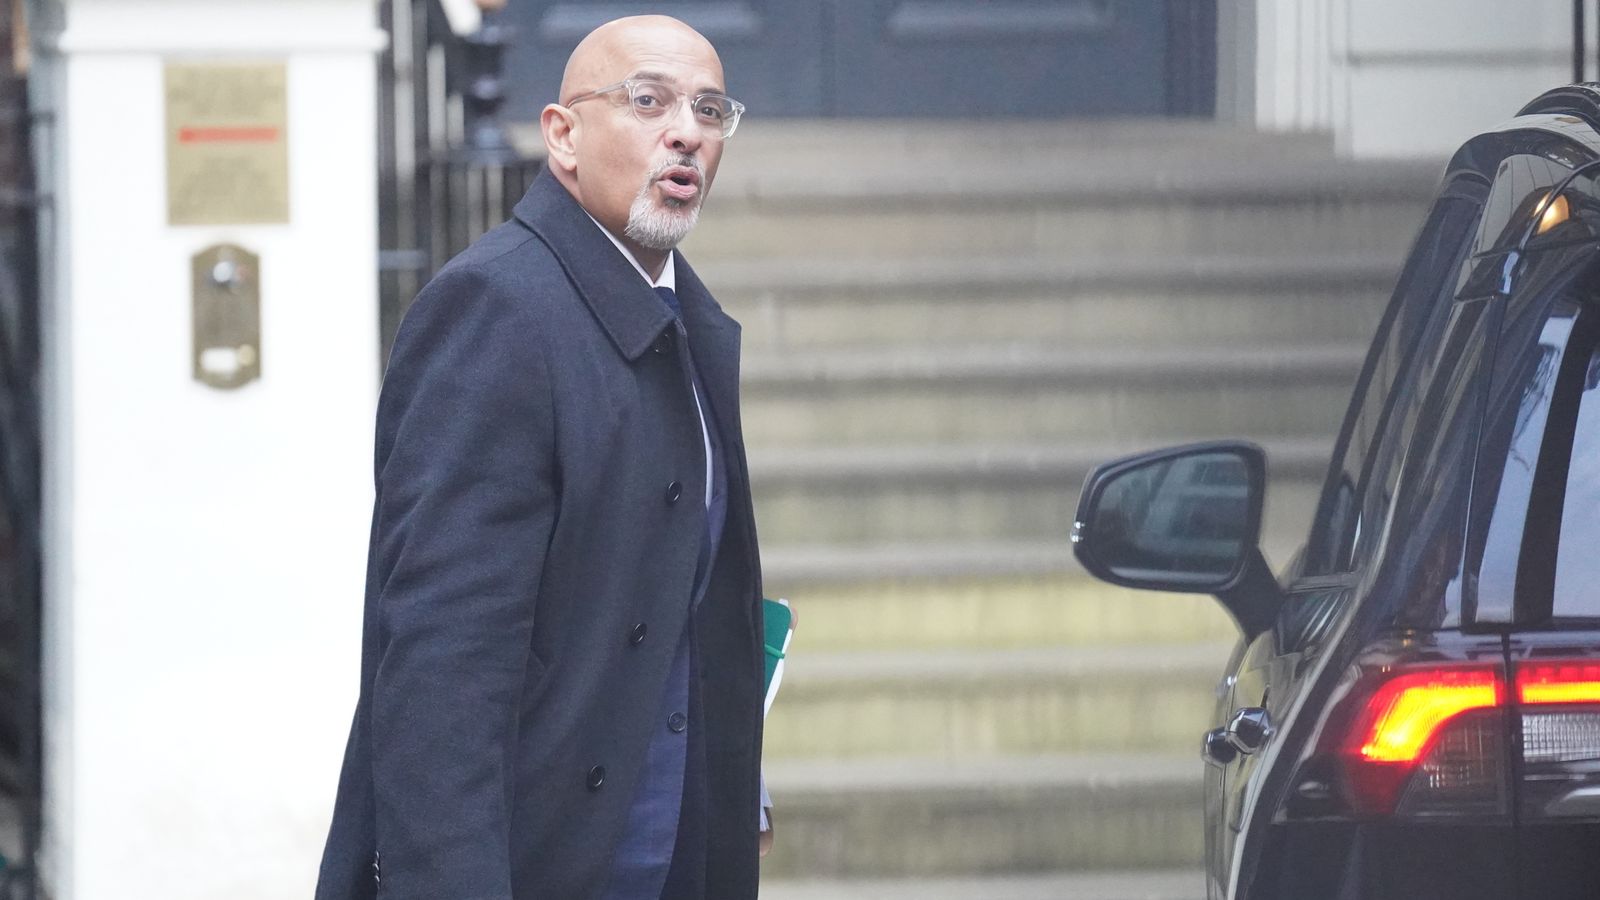 Nadhim Zahawi: Rishi Sunak orders investigation into Tory party chairman amid calls to sack him over tax row